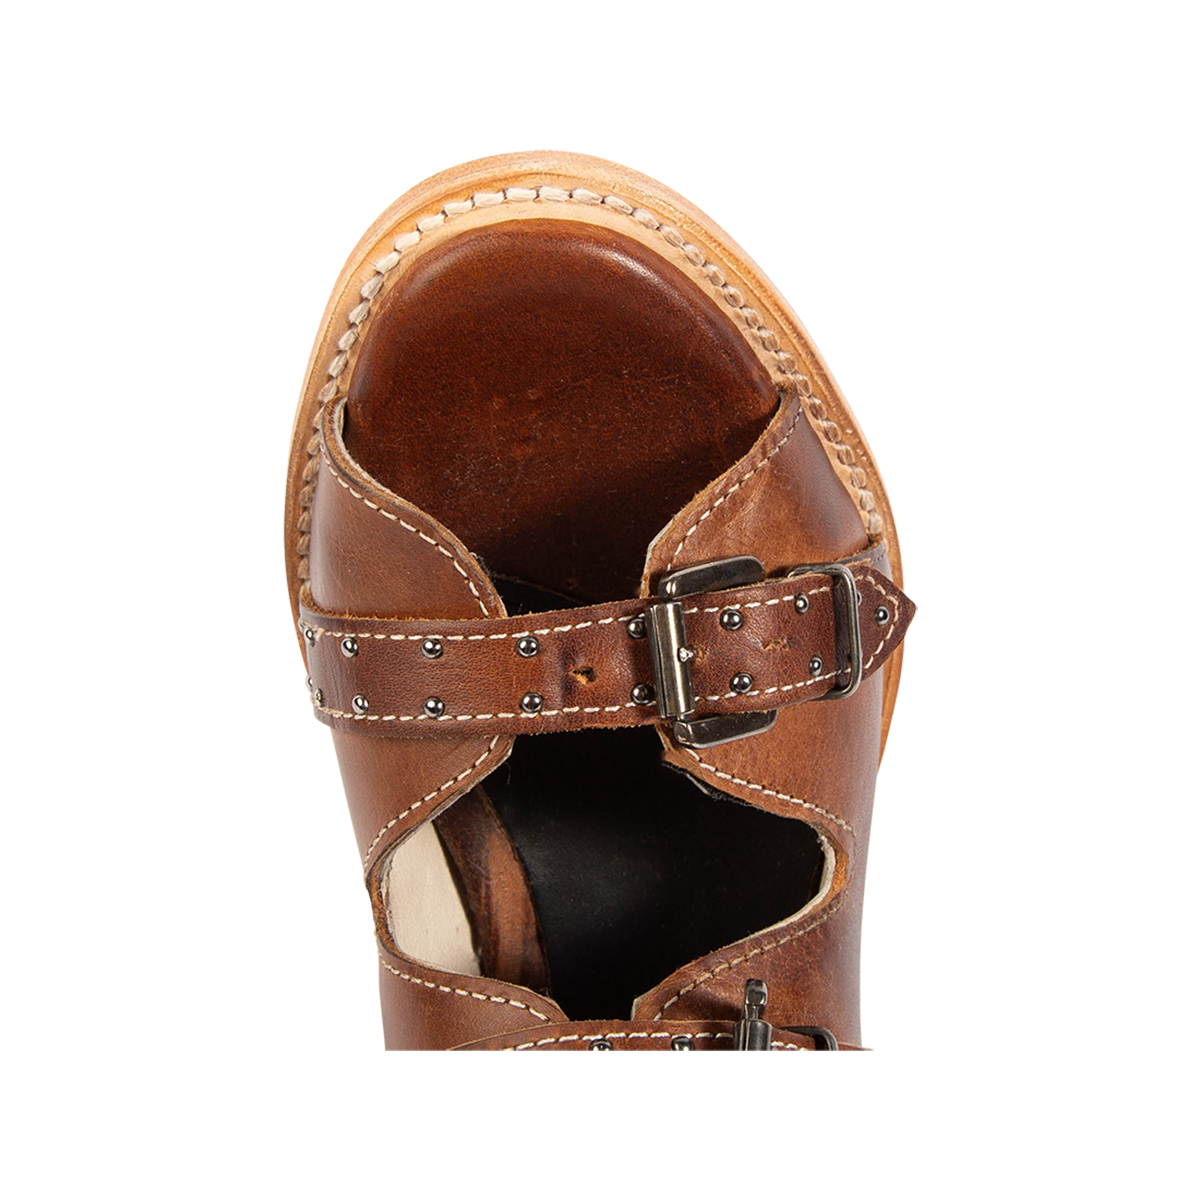 Top view showing an open toe construction and adjustable leather straps on FREEBIRD women's Gunnar cognac leather sandal